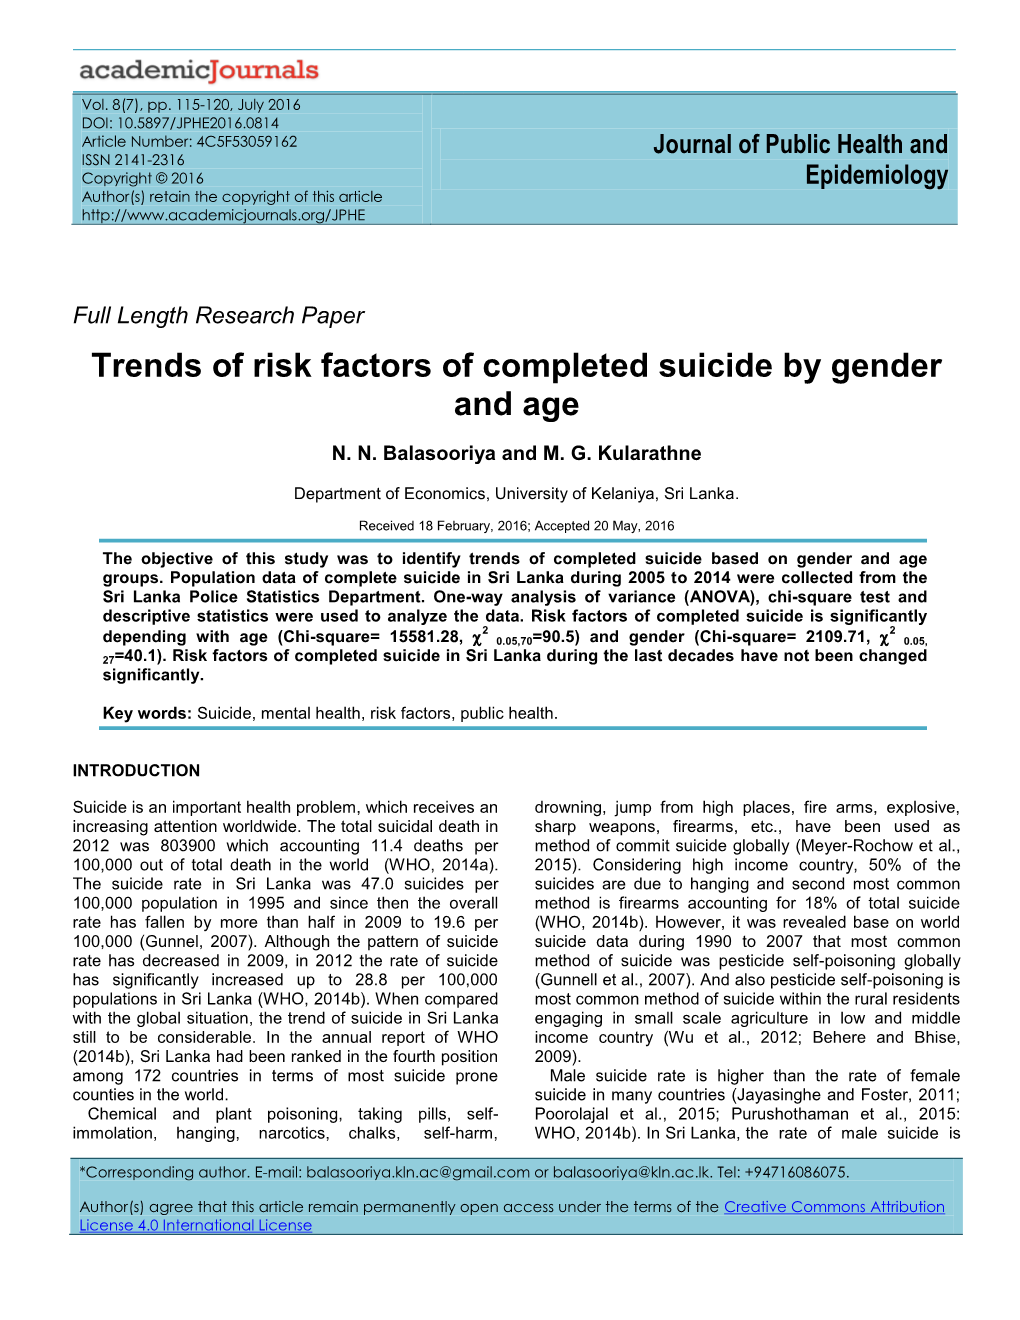 Trends of Risk Factors of Completed Suicide by Gender and Age